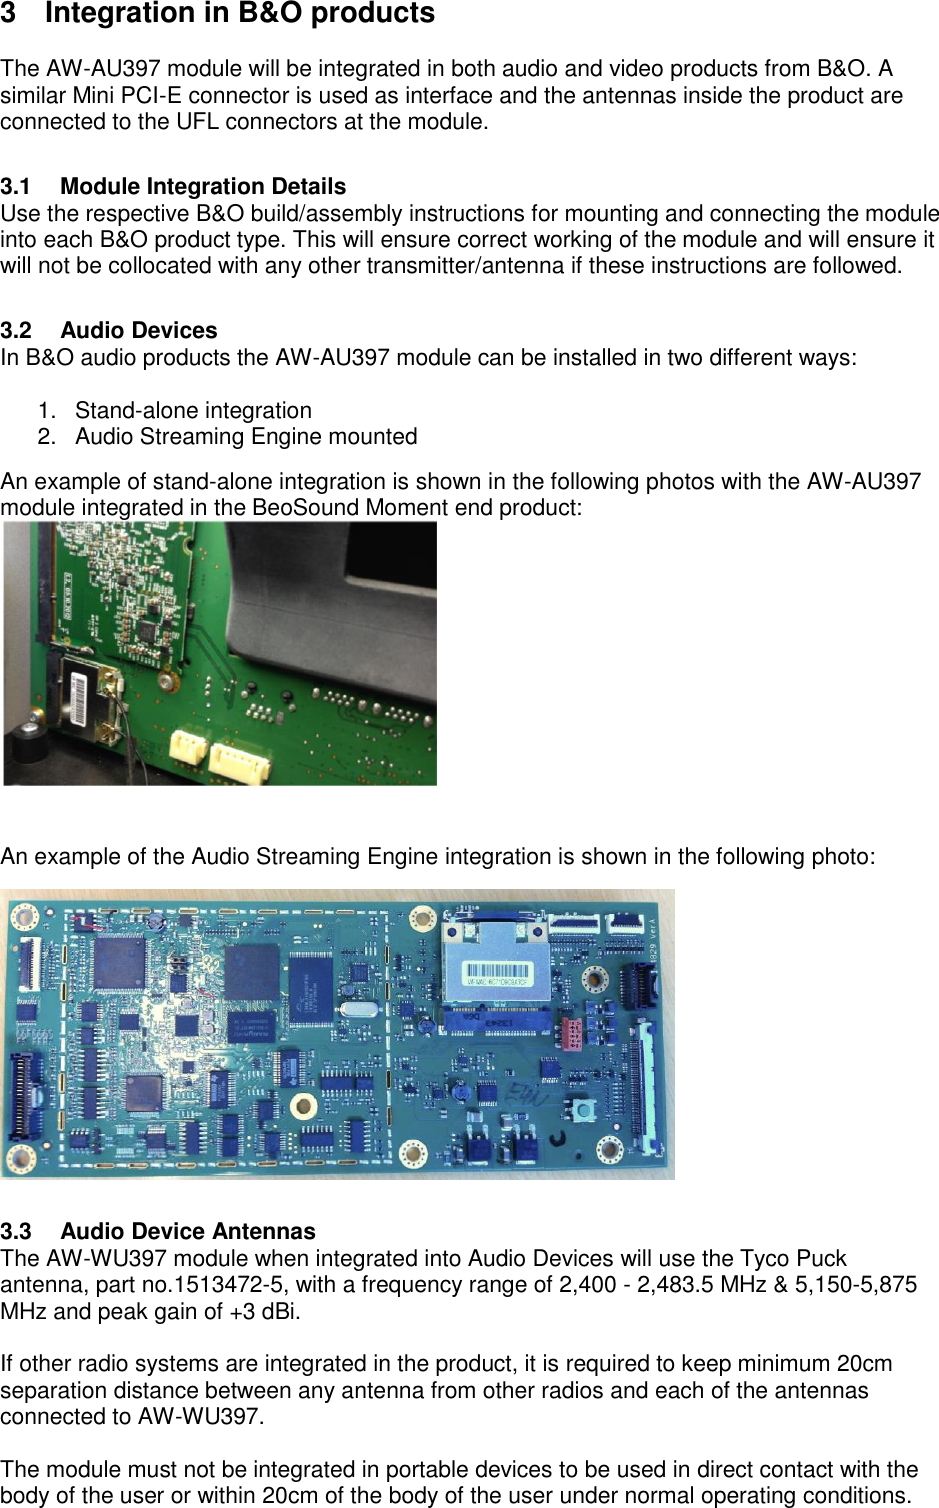 3  Integration in B&amp;O products  The AW-AU397 module will be integrated in both audio and video products from B&amp;O. A similar Mini PCI-E connector is used as interface and the antennas inside the product are connected to the UFL connectors at the module.  3.1  Module Integration Details Use the respective B&amp;O build/assembly instructions for mounting and connecting the module into each B&amp;O product type. This will ensure correct working of the module and will ensure it will not be collocated with any other transmitter/antenna if these instructions are followed.  3.2  Audio Devices In B&amp;O audio products the AW-AU397 module can be installed in two different ways:  1. Stand-alone integration 2. Audio Streaming Engine mounted An example of stand-alone integration is shown in the following photos with the AW-AU397 module integrated in the BeoSound Moment end product:    An example of the Audio Streaming Engine integration is shown in the following photo:    3.3  Audio Device Antennas The AW-WU397 module when integrated into Audio Devices will use the Tyco Puck antenna, part no.1513472-5, with a frequency range of 2,400 - 2,483.5 MHz &amp; 5,150-5,875 MHz and peak gain of +3 dBi.  If other radio systems are integrated in the product, it is required to keep minimum 20cm separation distance between any antenna from other radios and each of the antennas connected to AW-WU397.  The module must not be integrated in portable devices to be used in direct contact with the body of the user or within 20cm of the body of the user under normal operating conditions.   